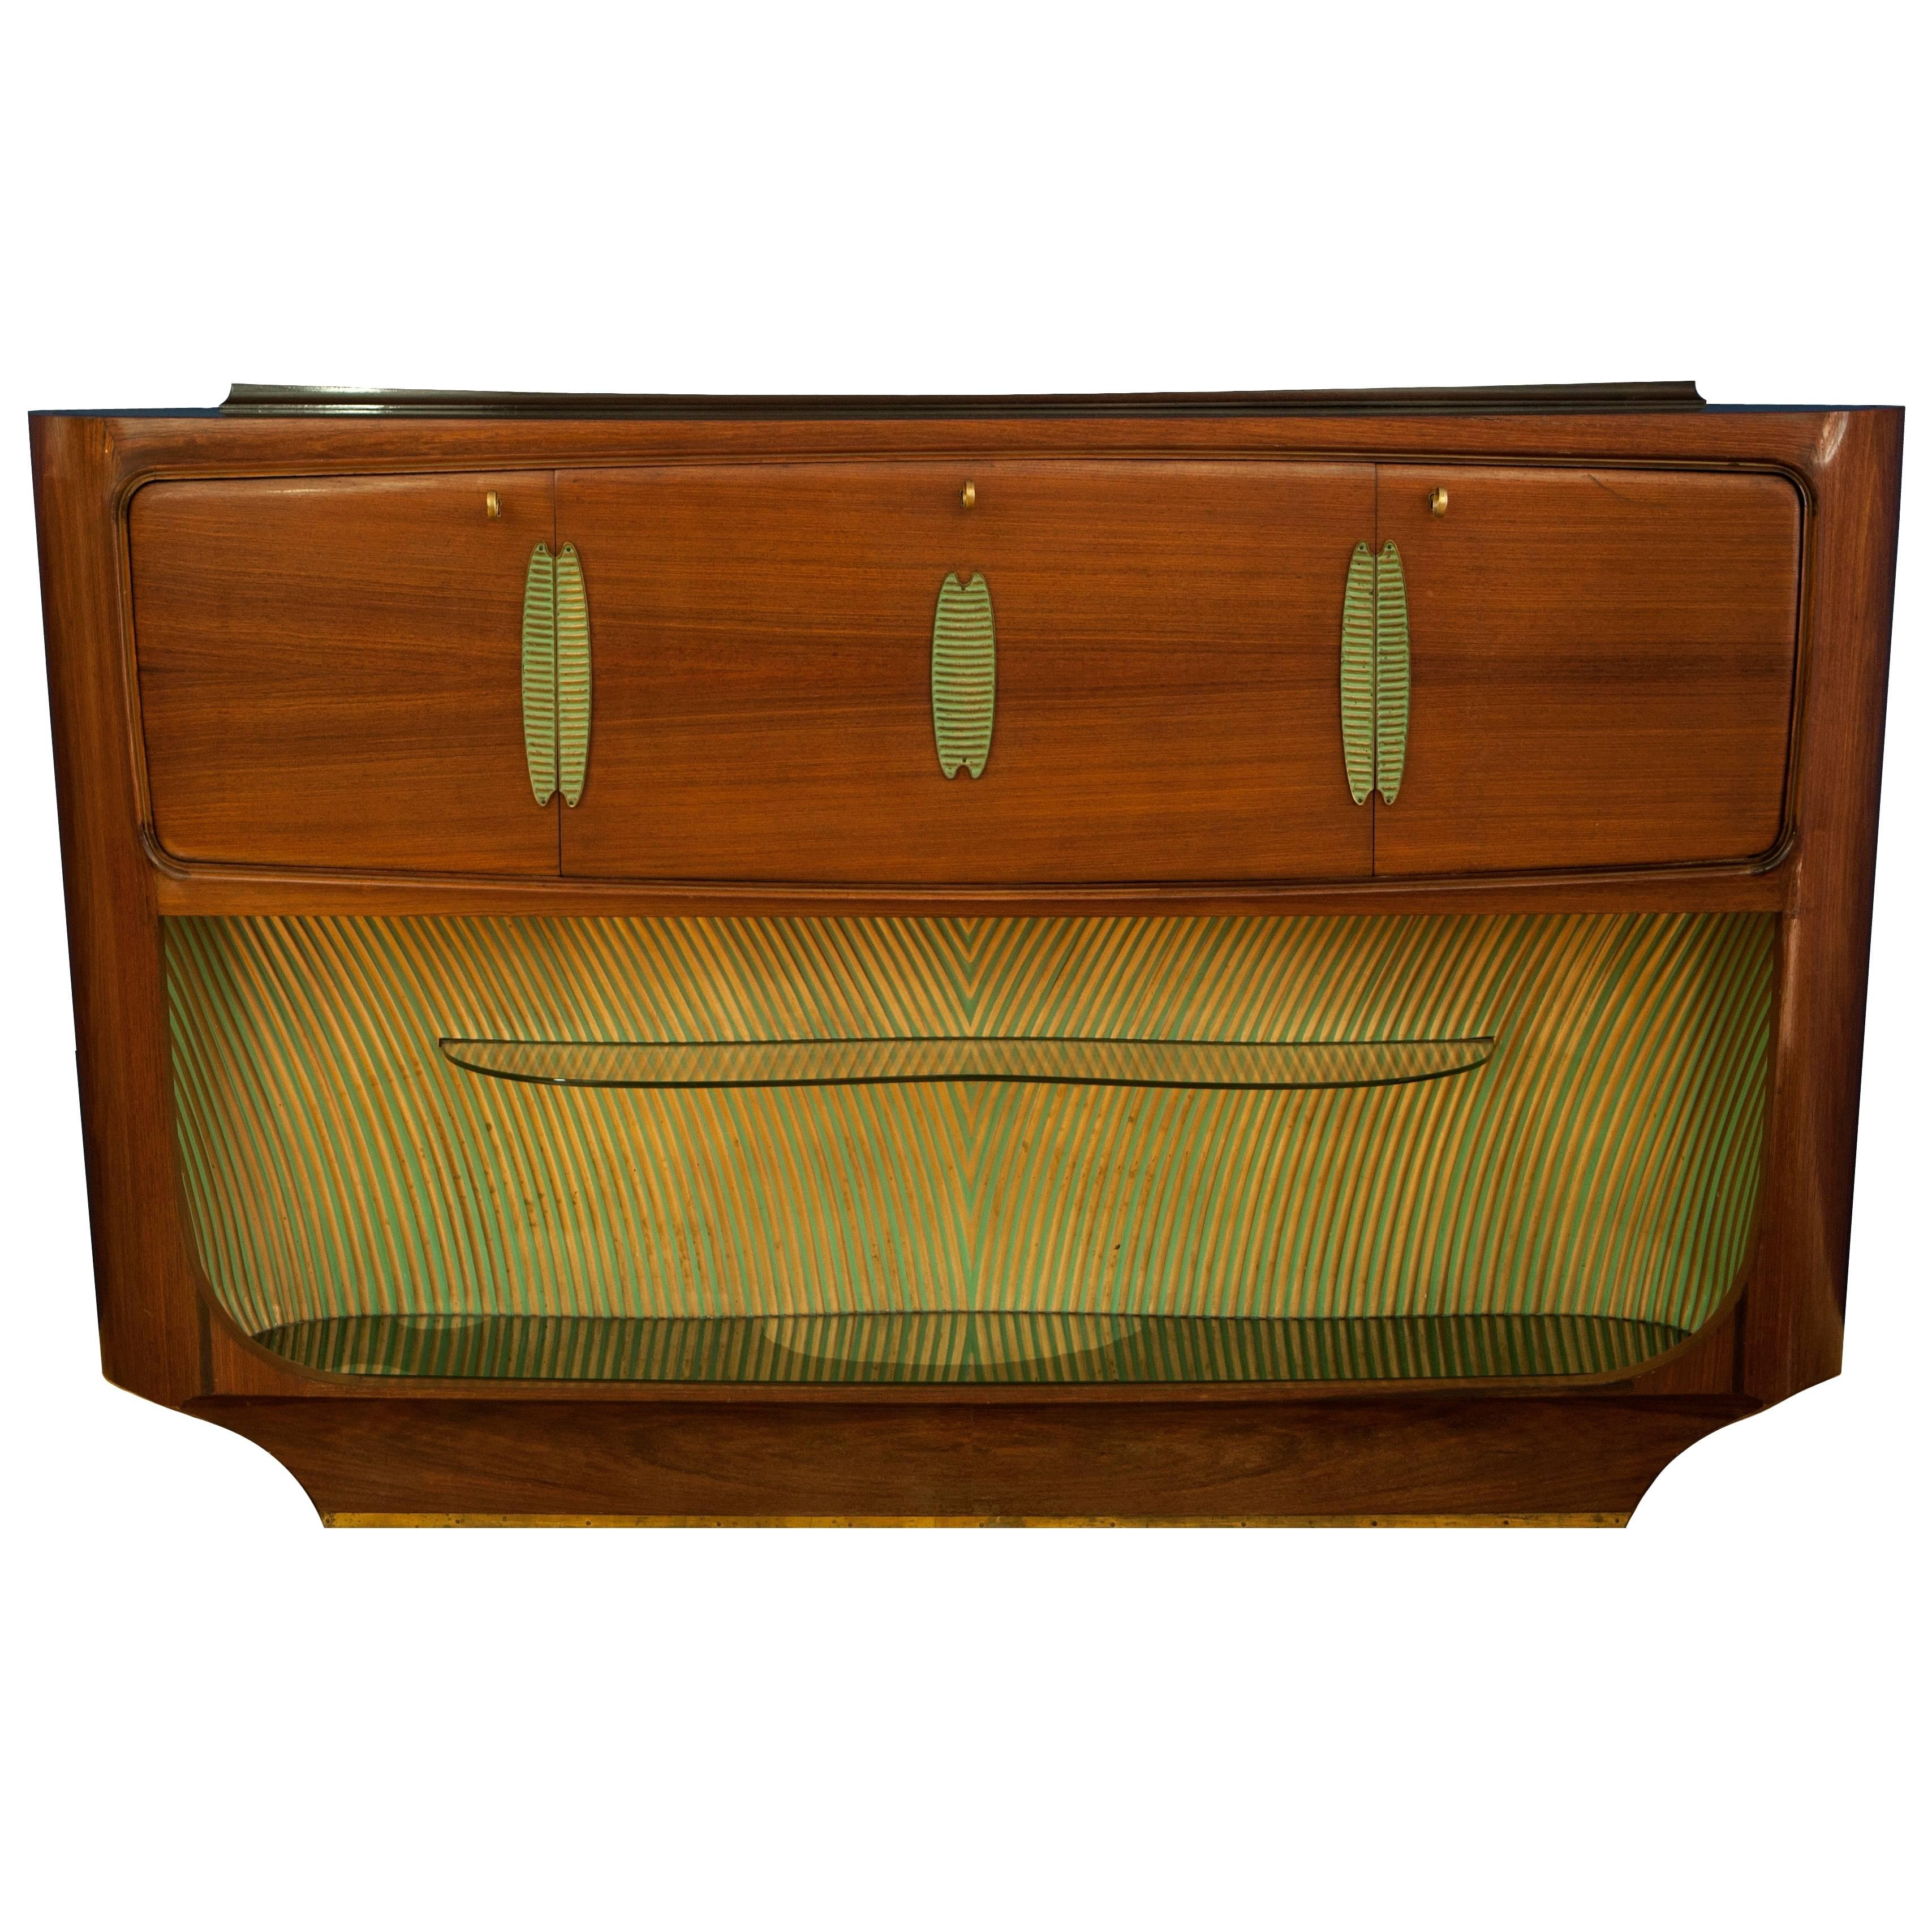 Vittorio Dassi Art Deco Rosewood Buffet, Bar Cabinet, Italy, 1940s For Sale